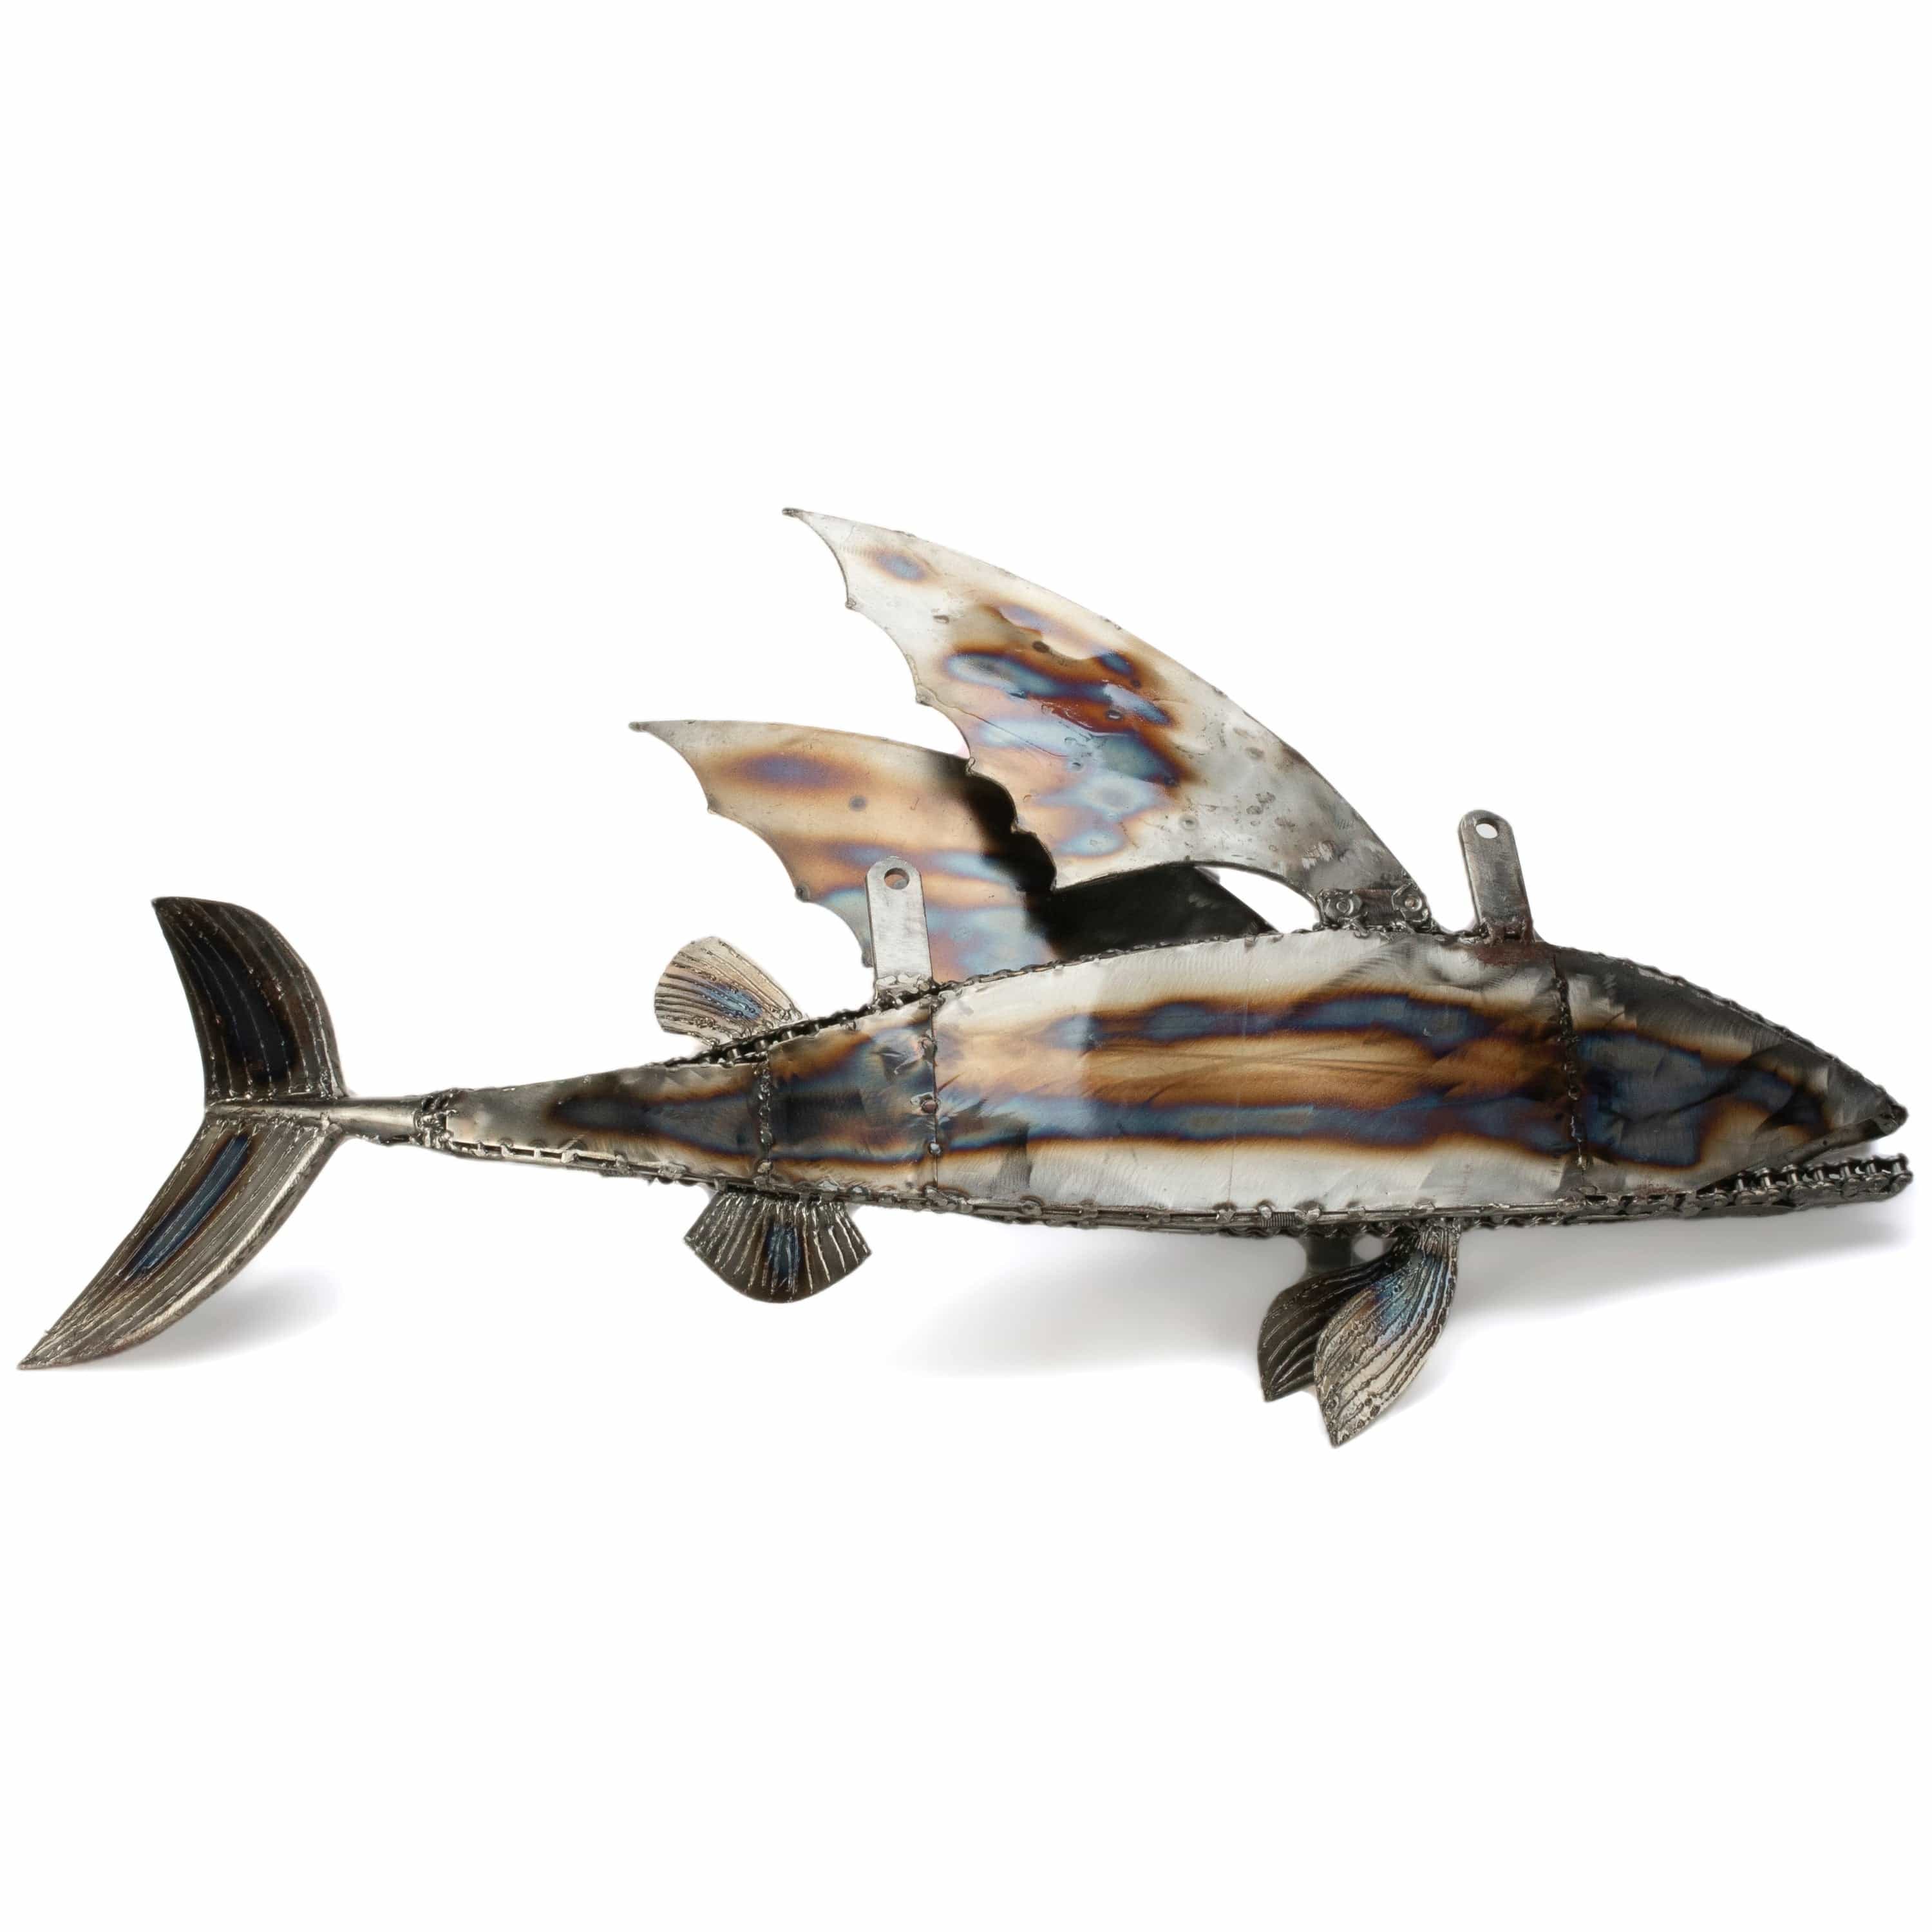 KALIFANO Recycled Metal Art 35" Flying Fish (Right) Inspired Recycled Metal Art Sculpture RMS-FFR88x55-PK